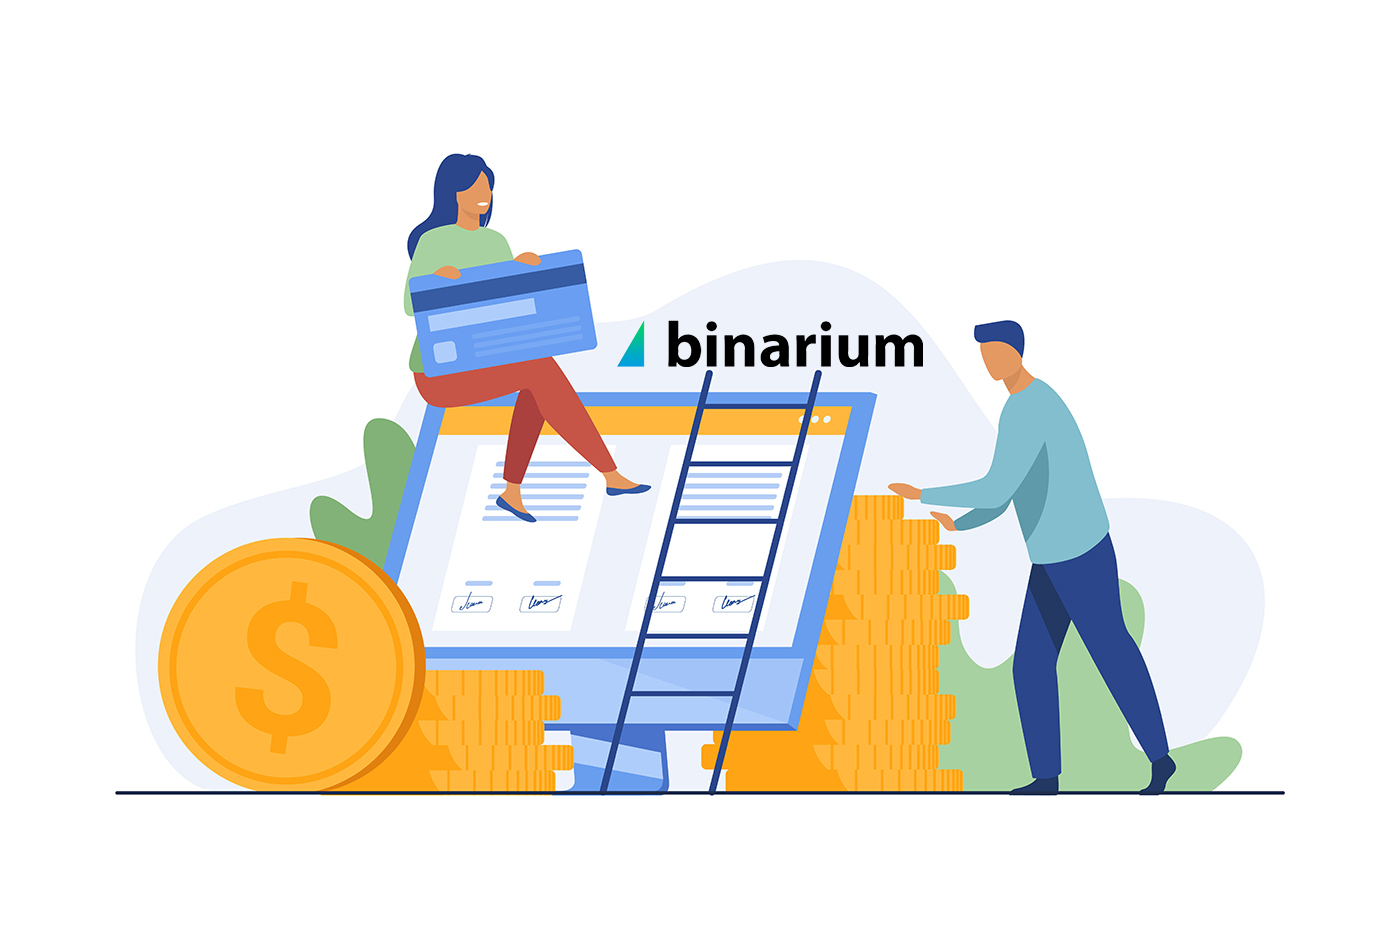 How to Sign Up and Deposit Money at Binarium